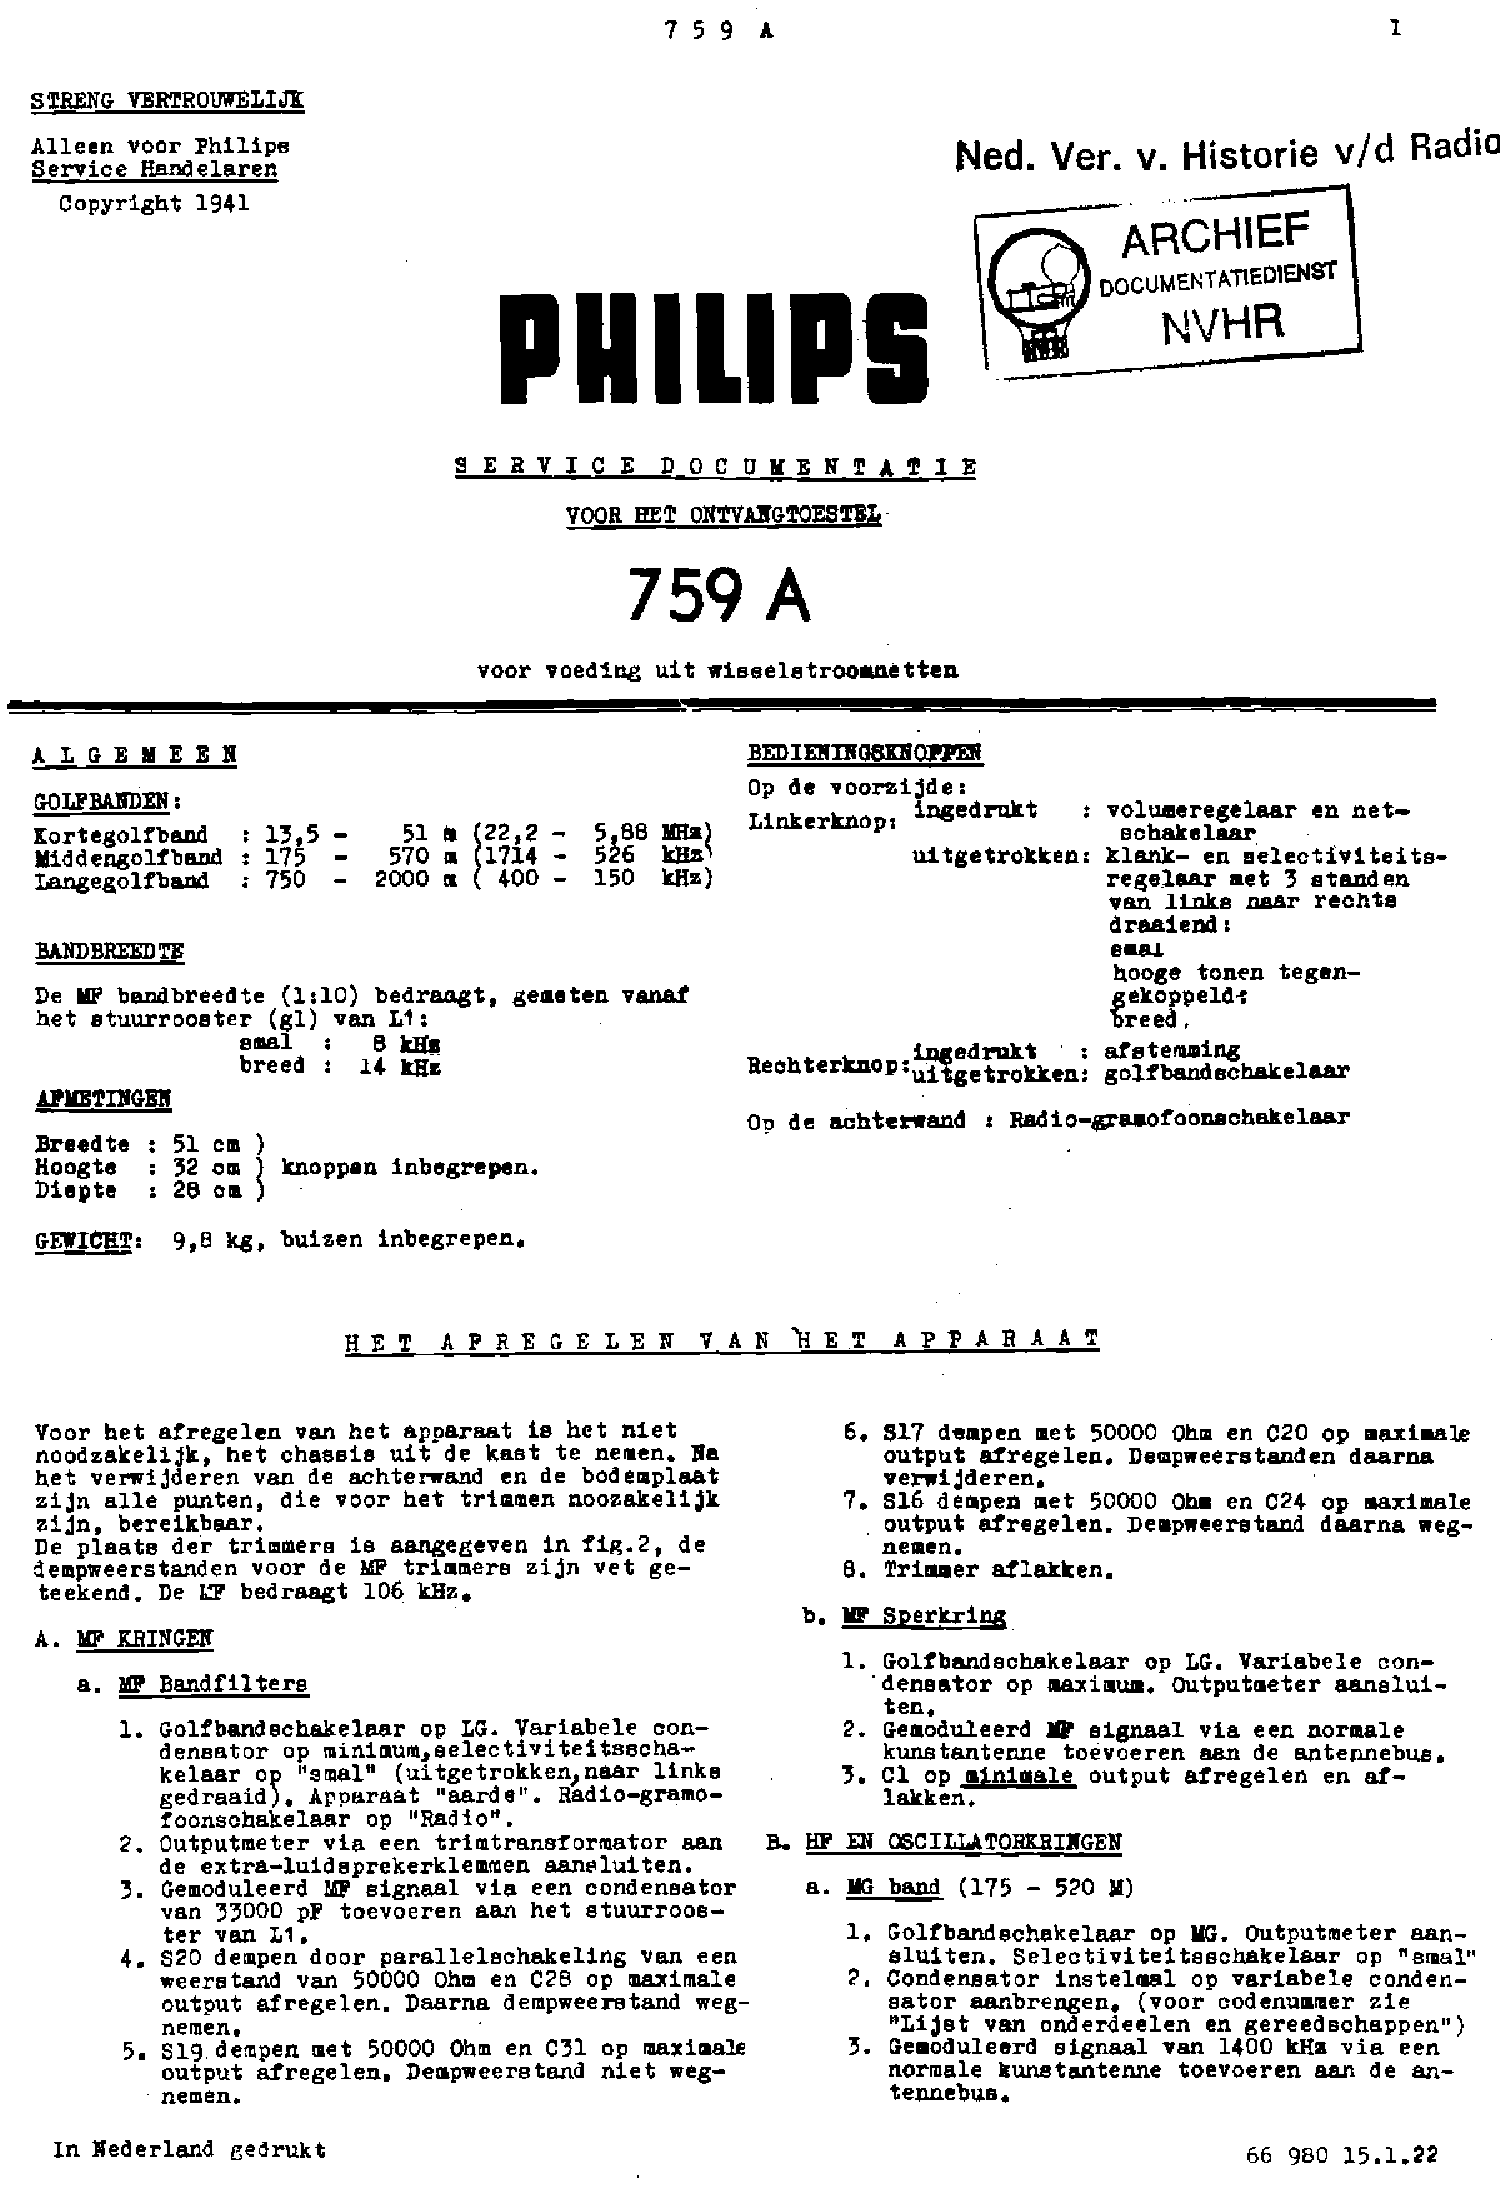 PHILIPS 759A AC RECEIVER 1941 SM service manual (1st page)